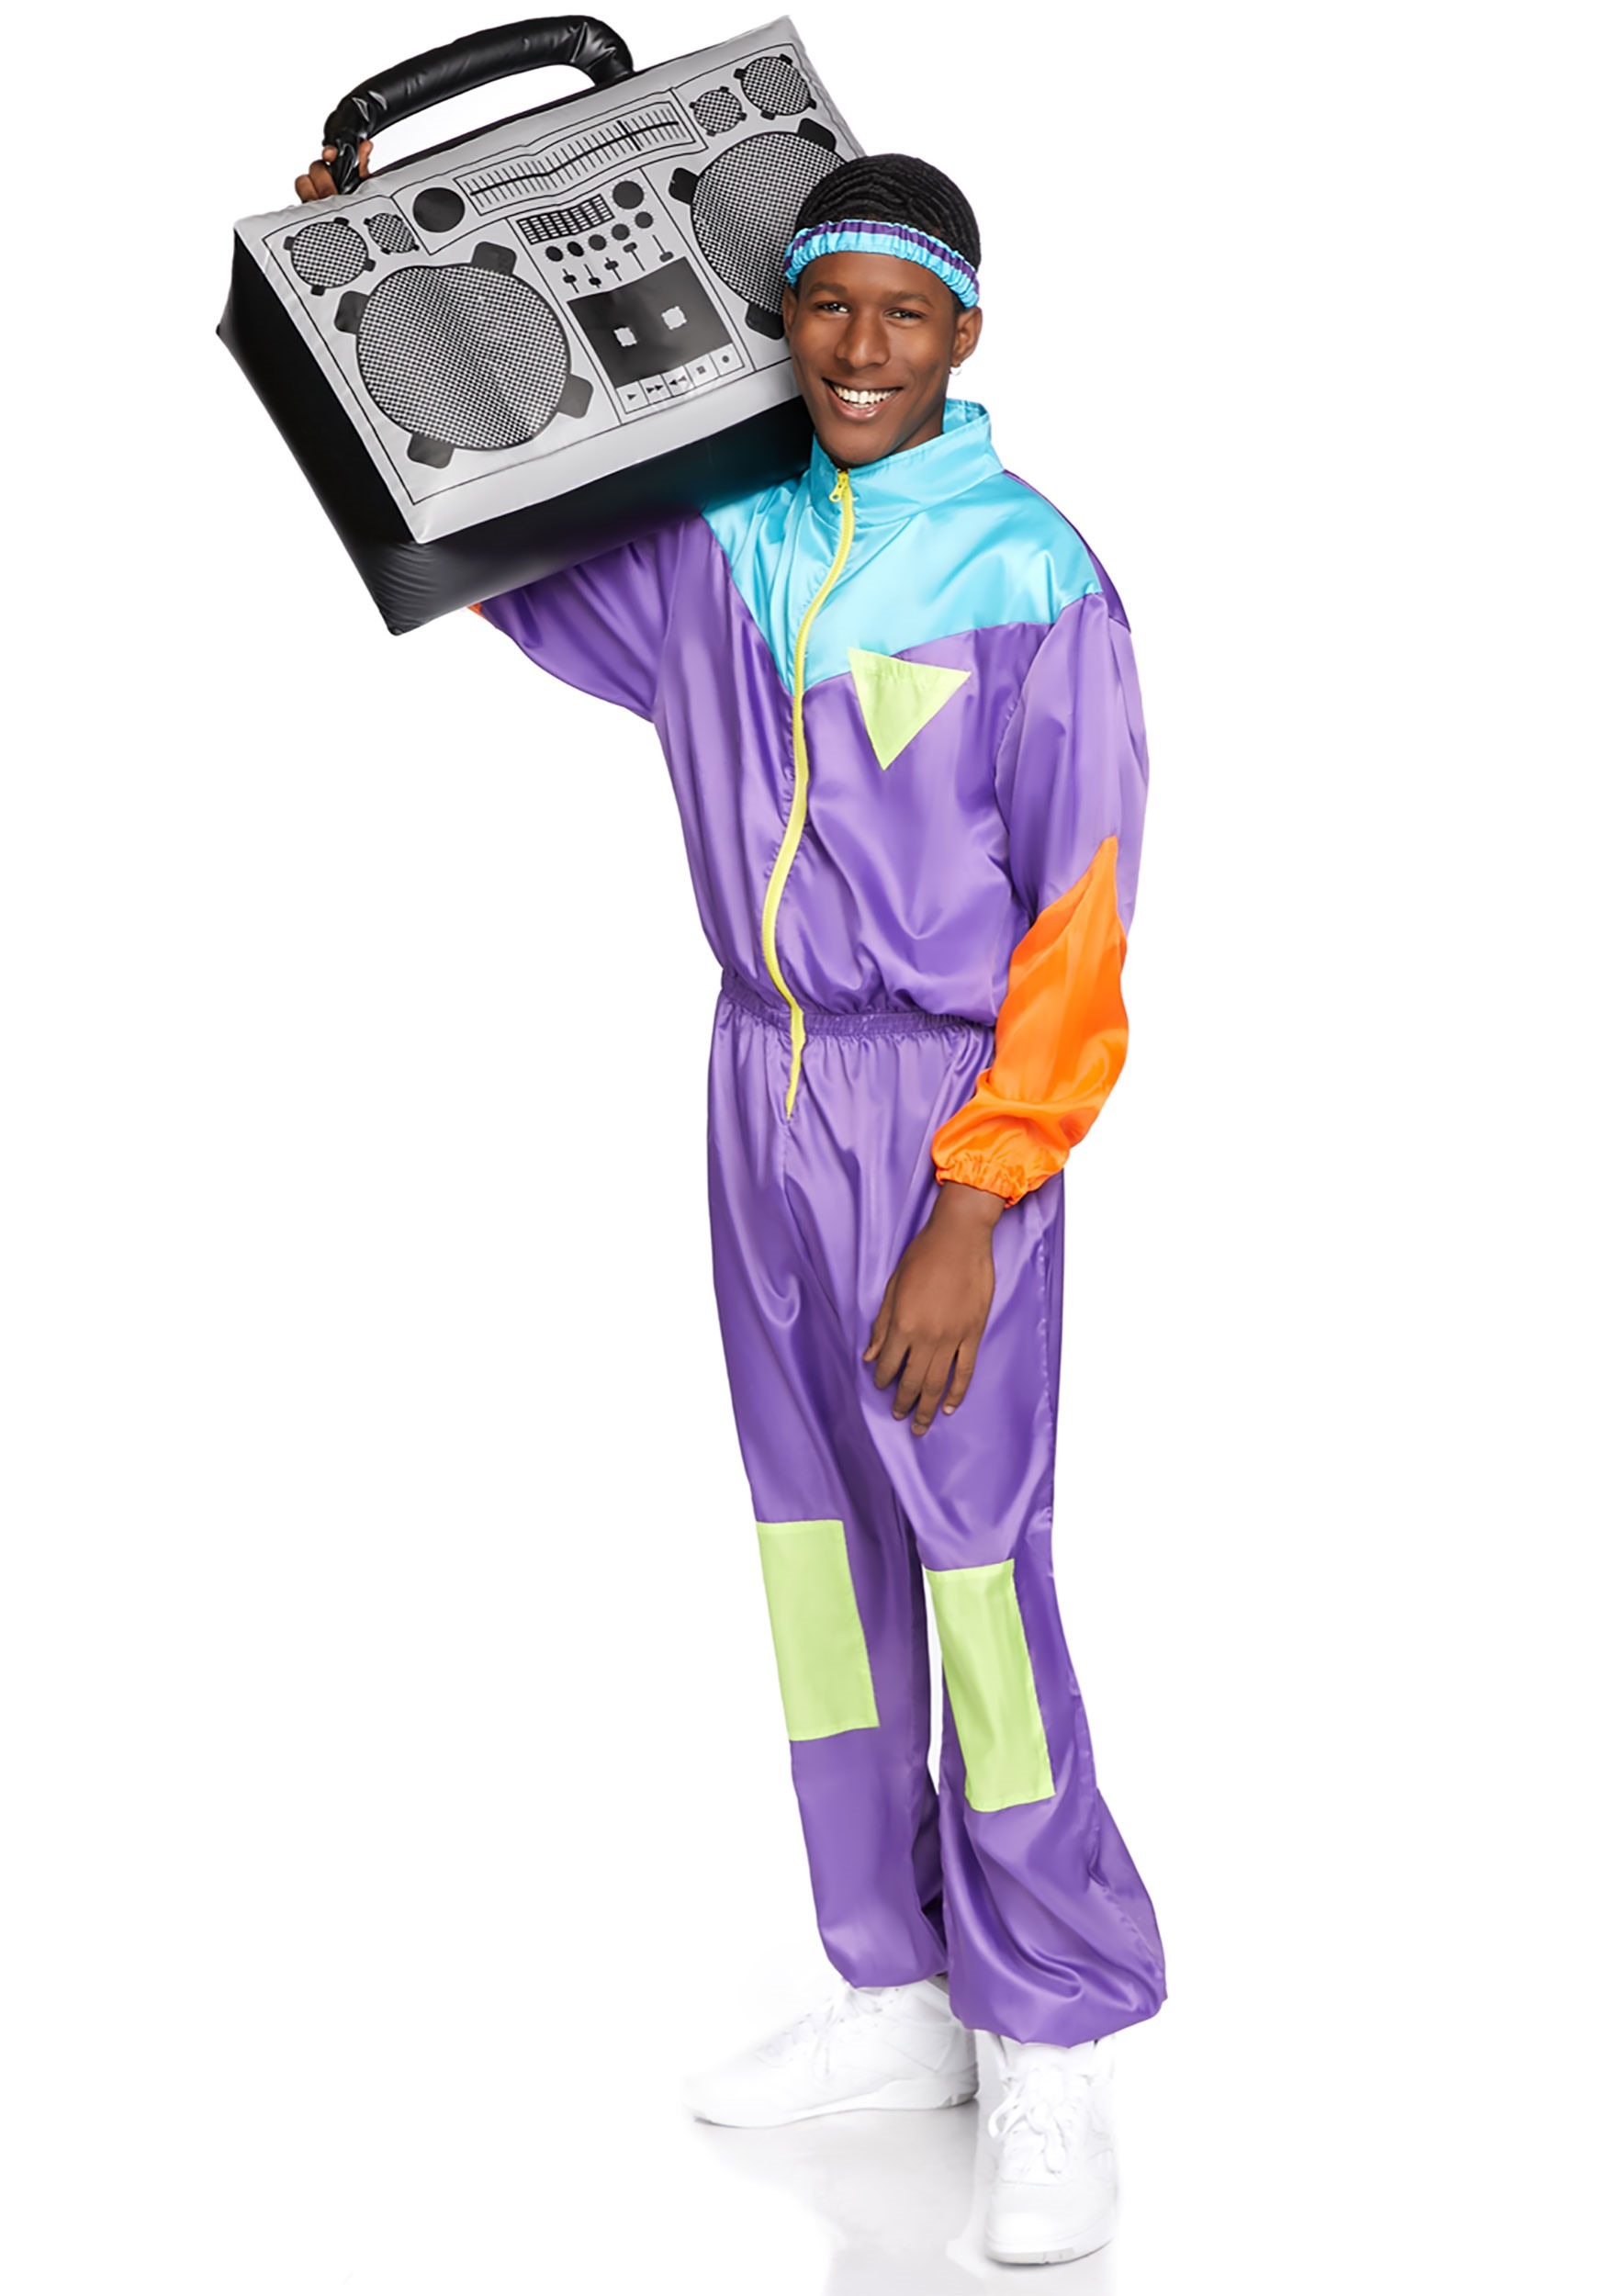 https://images.halloweencostumes.ca/products/58022/1-1/mens-awesome-80s-ski-suit-costume.jpg